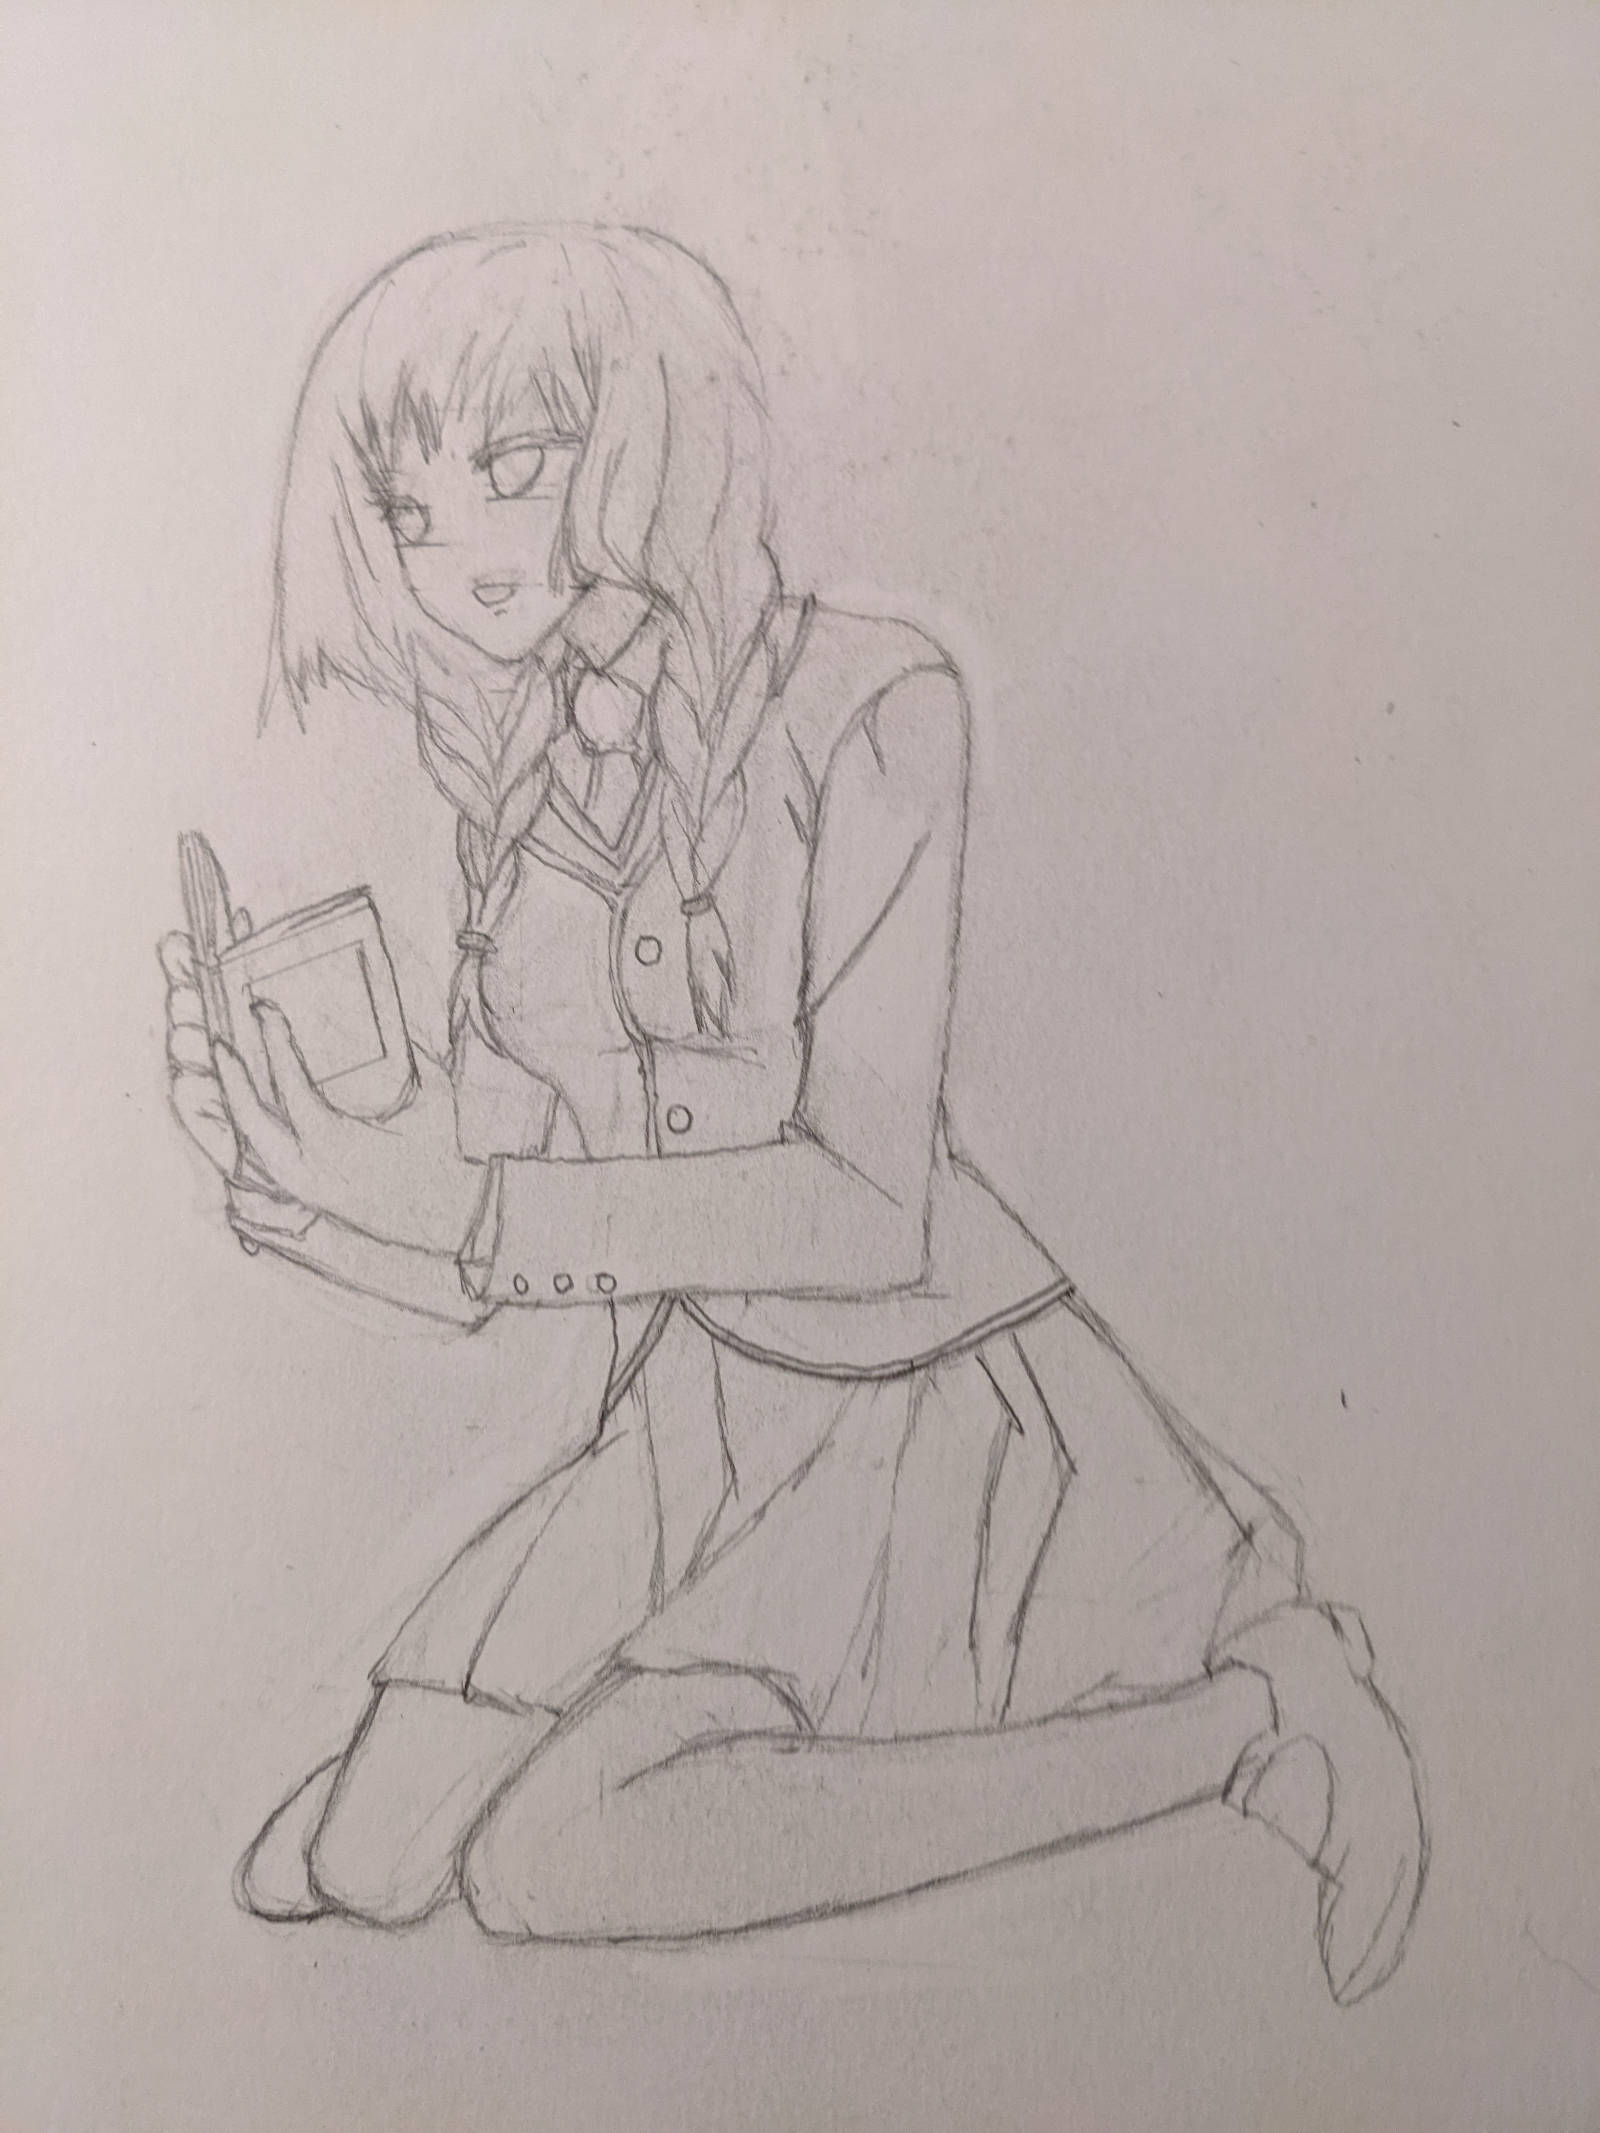 Girl with blazer and skirt sitting down. A tree is next to her. She is reading a diary. Penciled